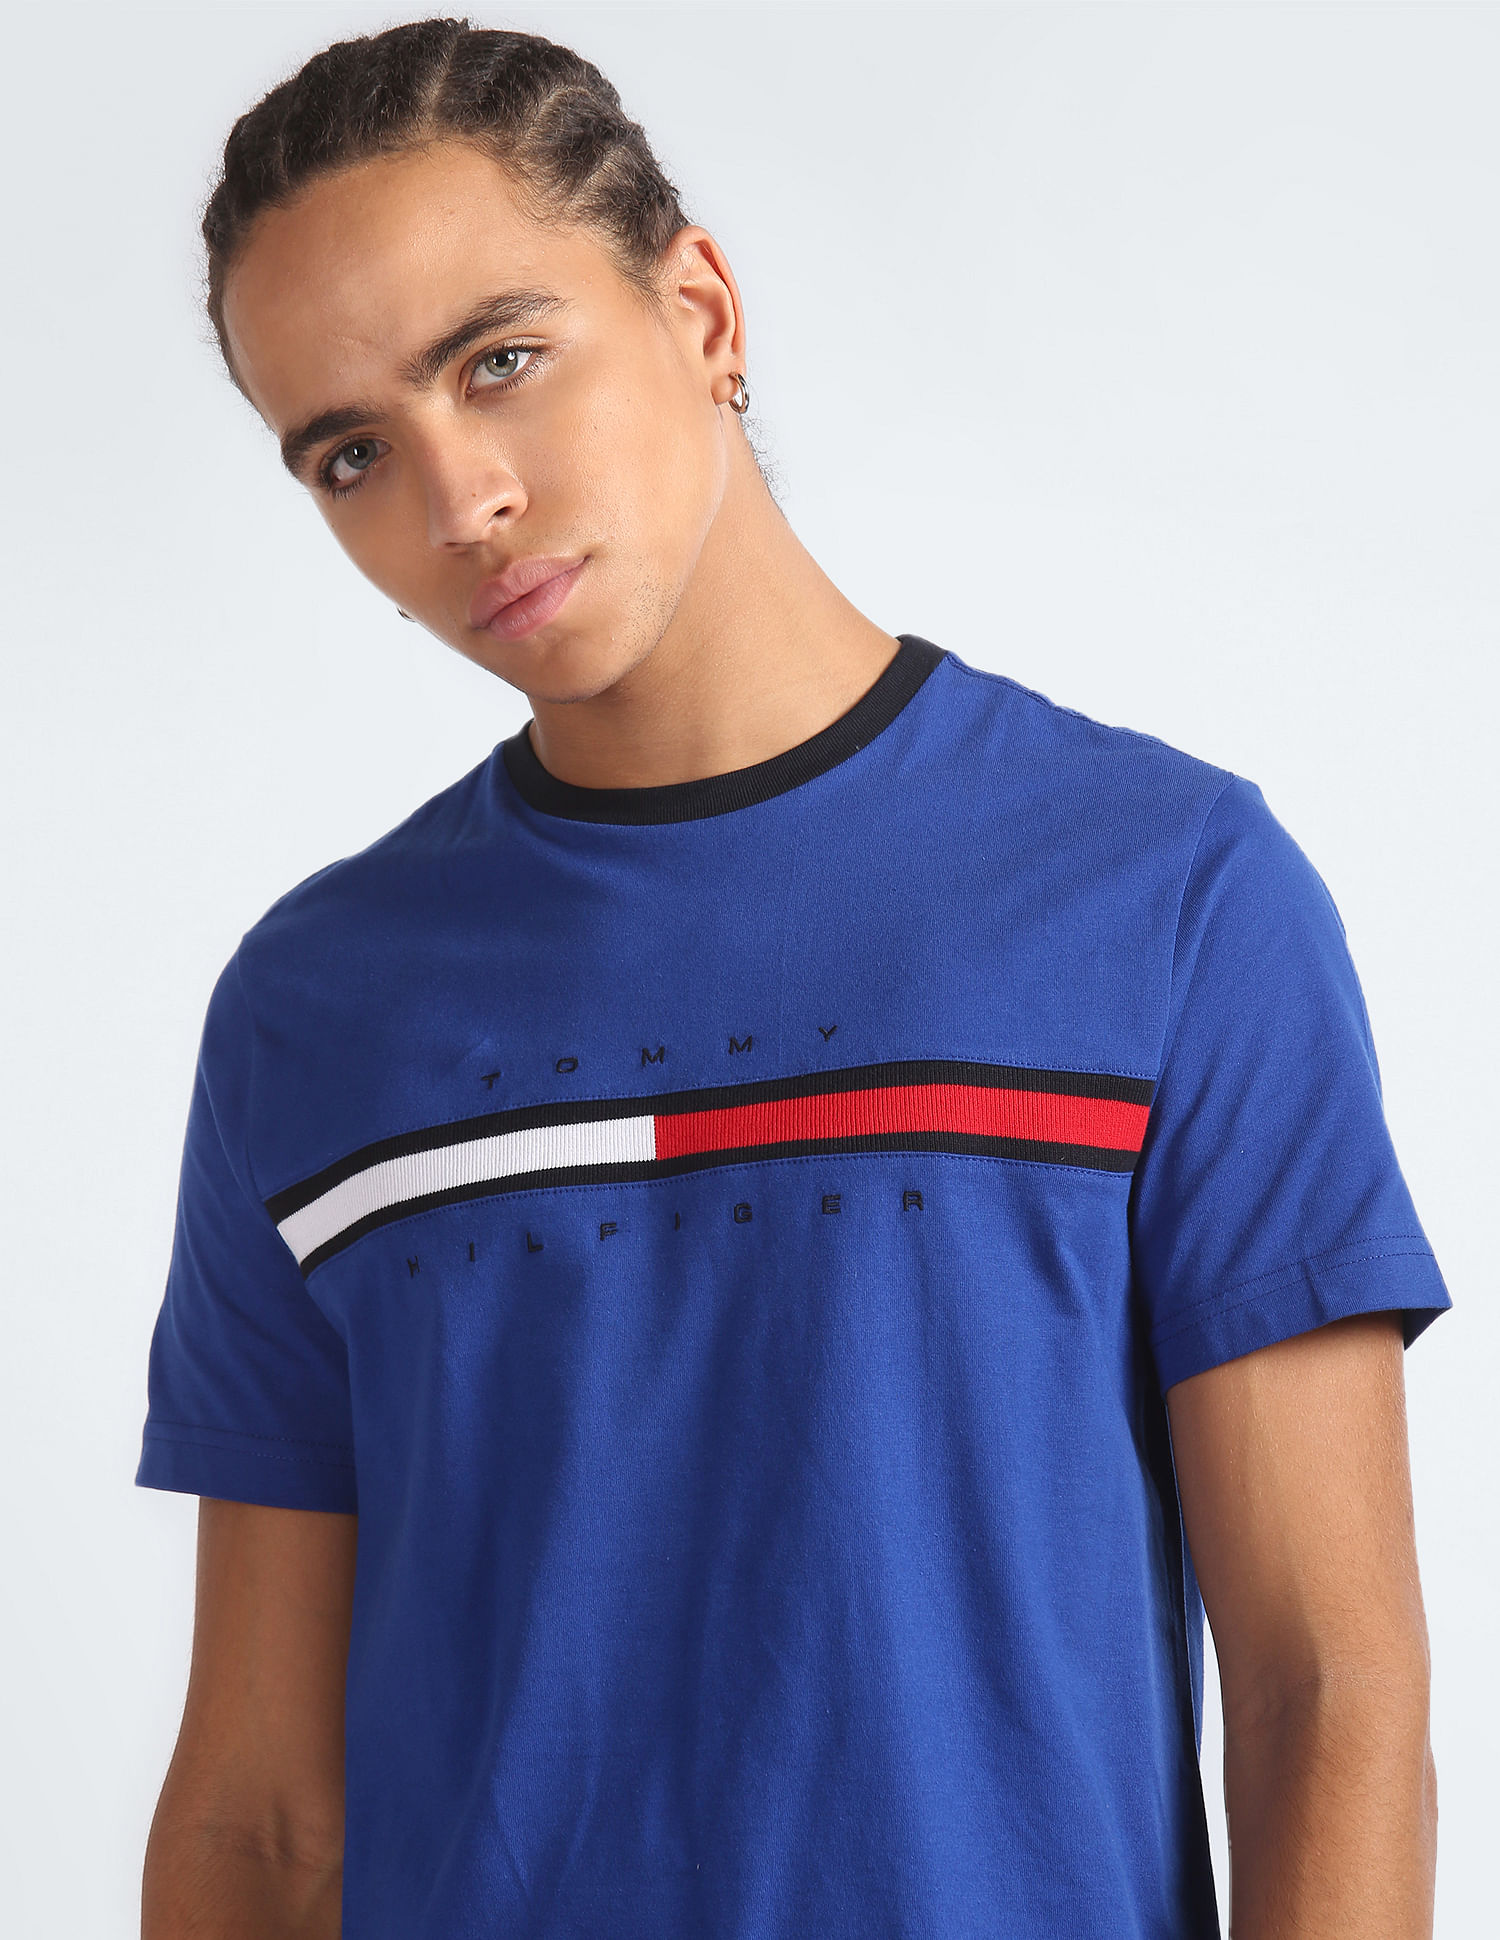 lustre websted mavepine Buy Tommy Hilfiger Pure Cotton Tino Regular Fit T-Shirt - NNNOW.com